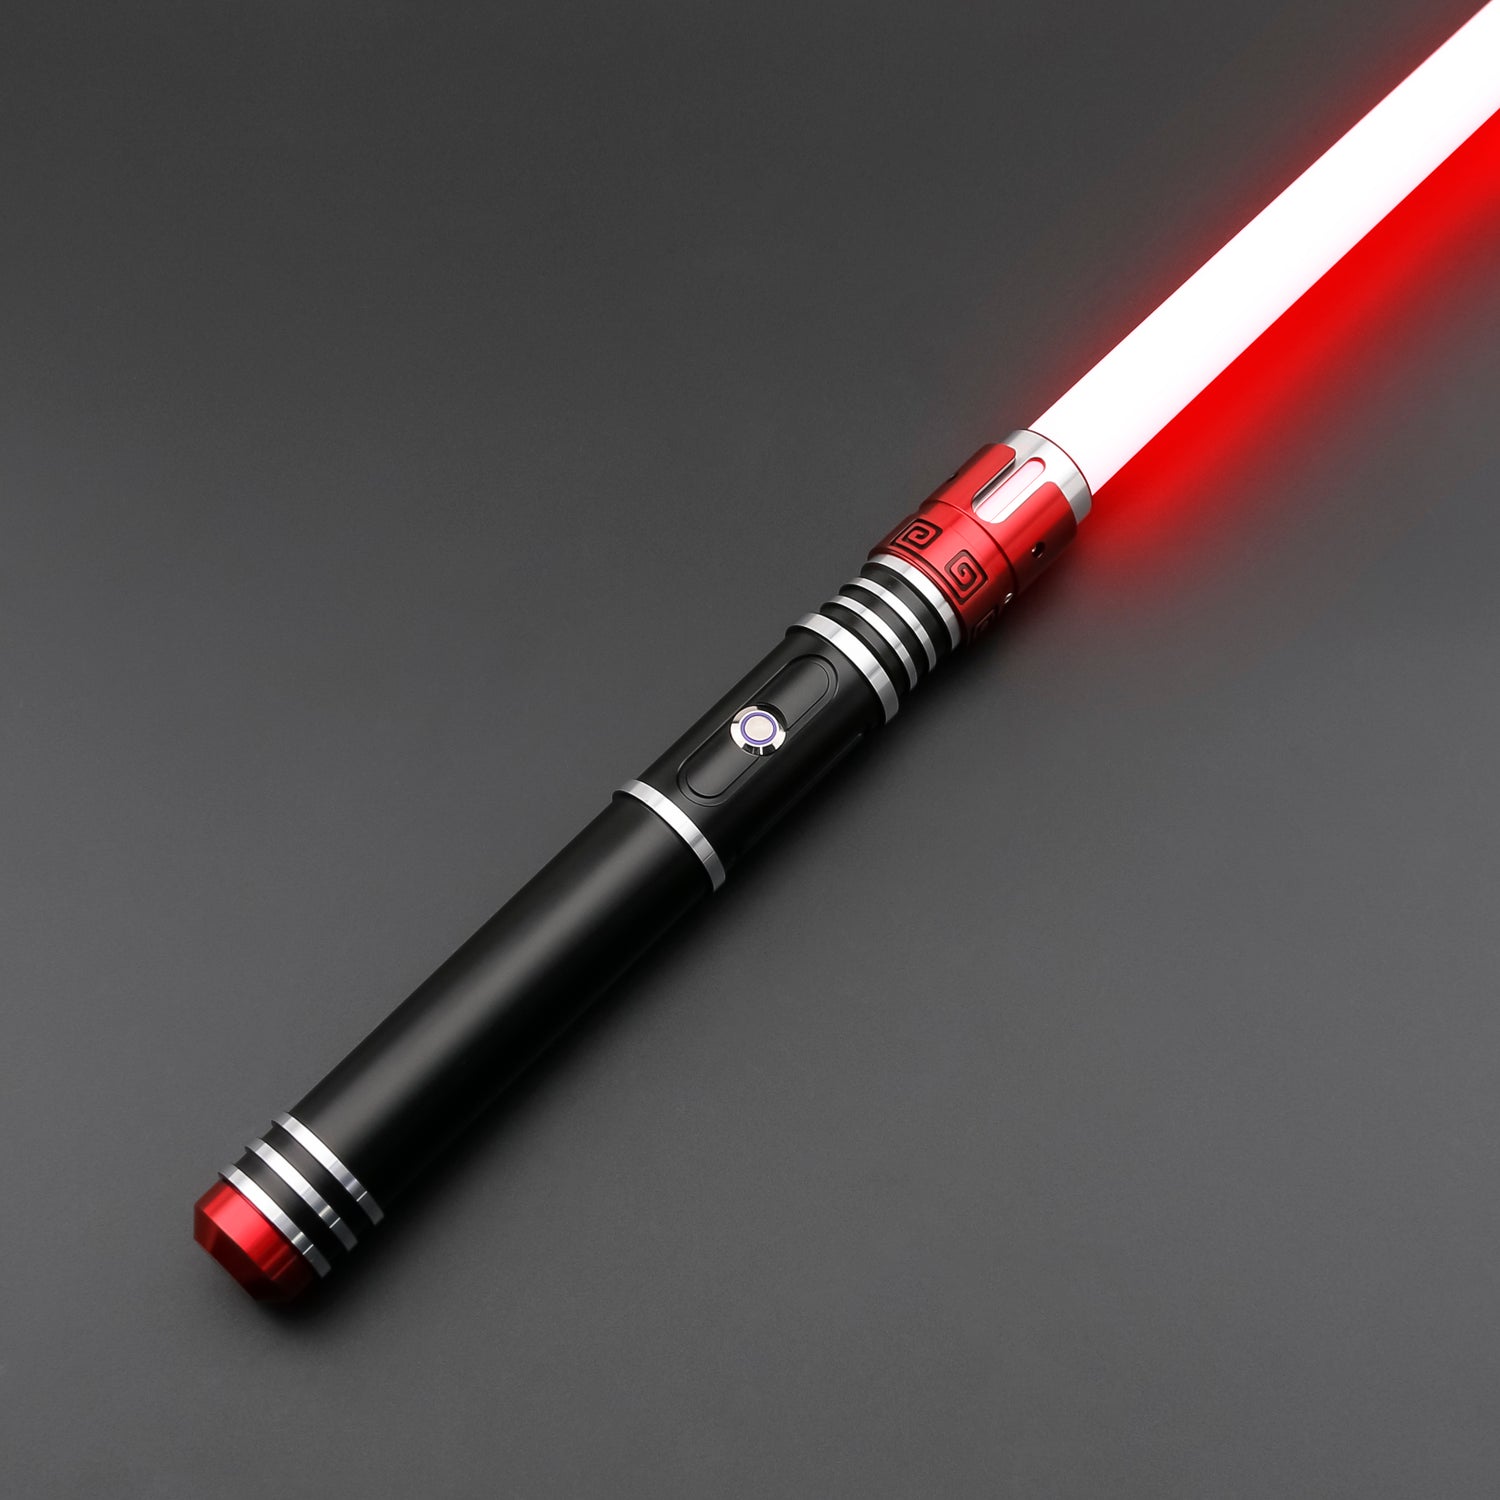 Acolyte red lightsaber